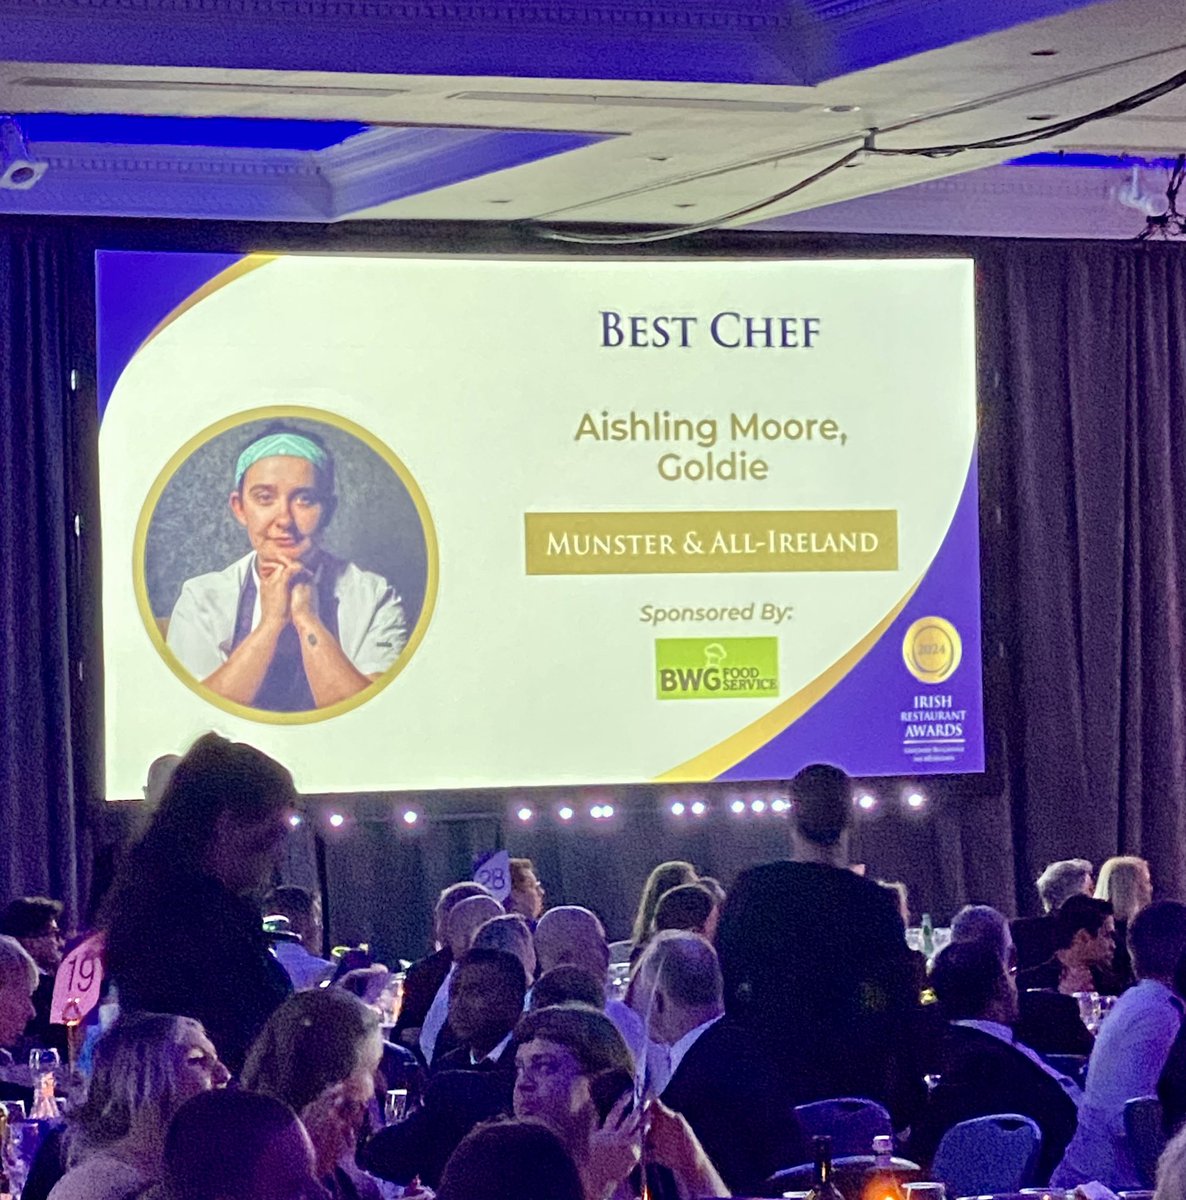 A great night for the Cork culinary scene with wins for @meeranchef @chefahmetdede @goldie_cork @ElbowLaneCork and the wonderful oasis of music and hospitality that is @LevisBallydehob at tonight’s #FoodOscars @restawards @RAI_ie Awards @ClaytonHotelBal #PureCork